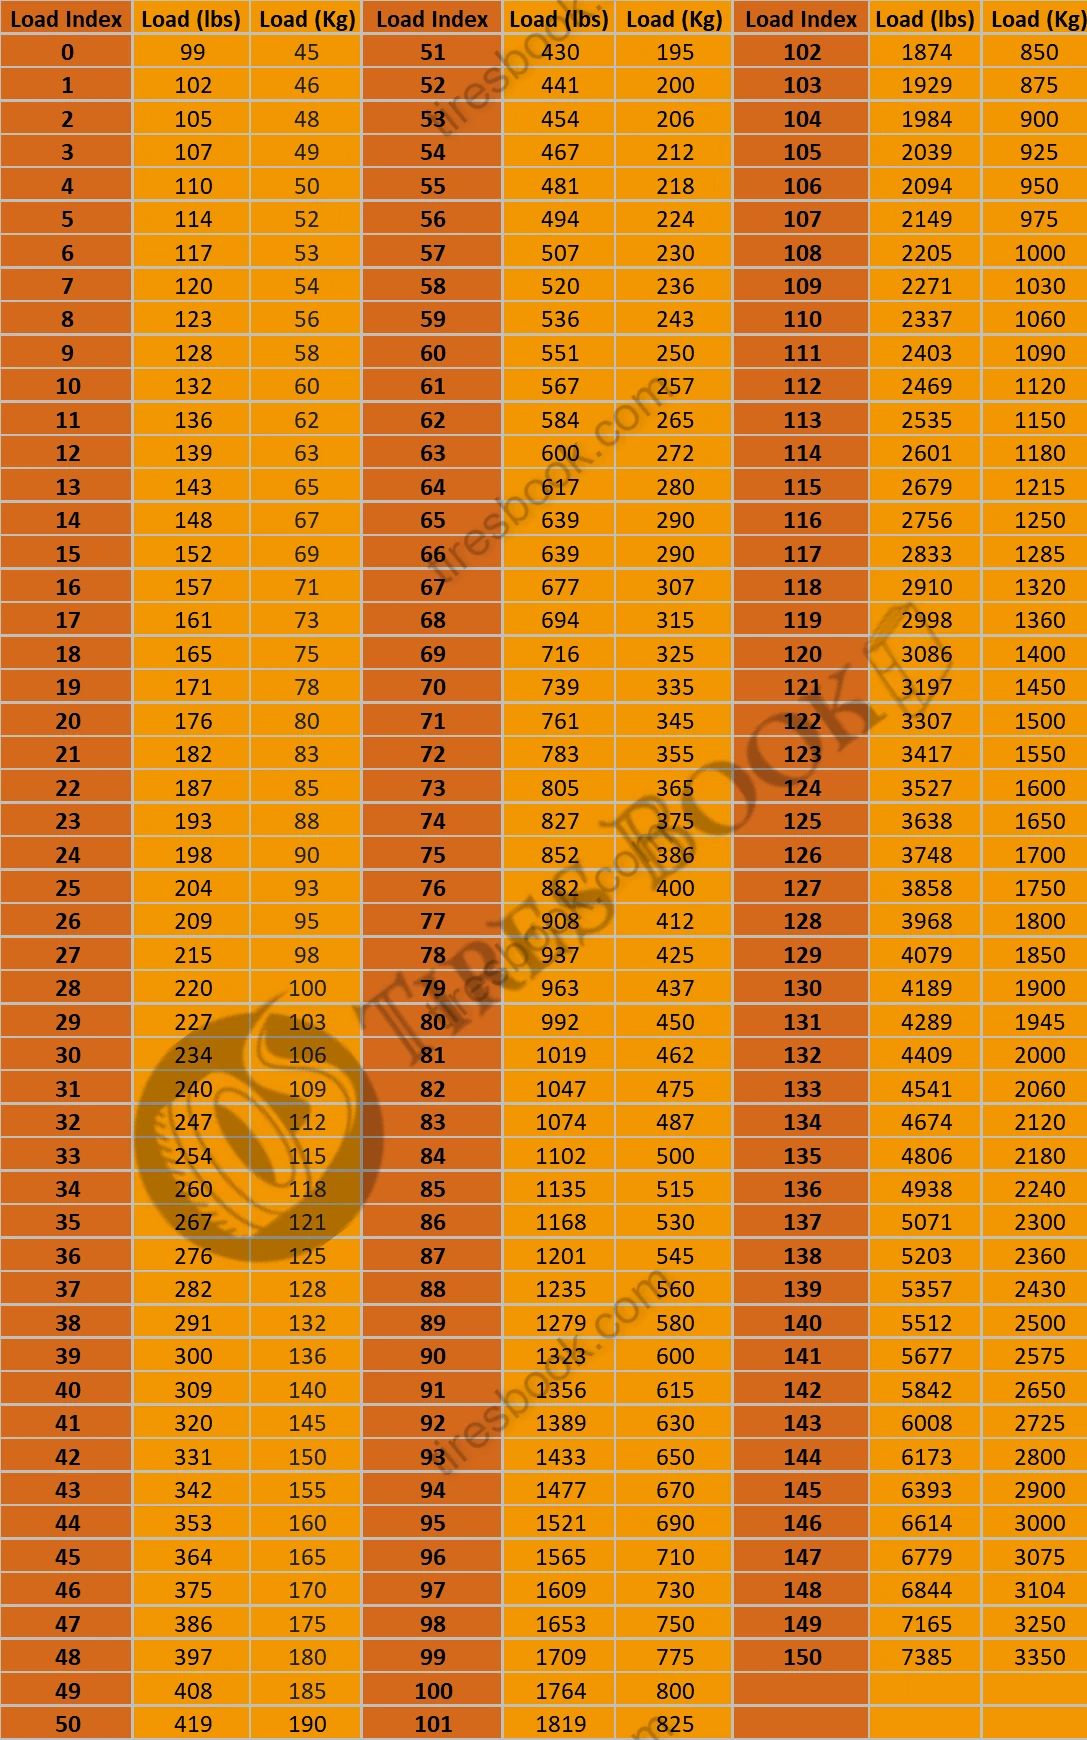 Tire load index chart by Tires Book -  Showing load index values from 0 to 150.